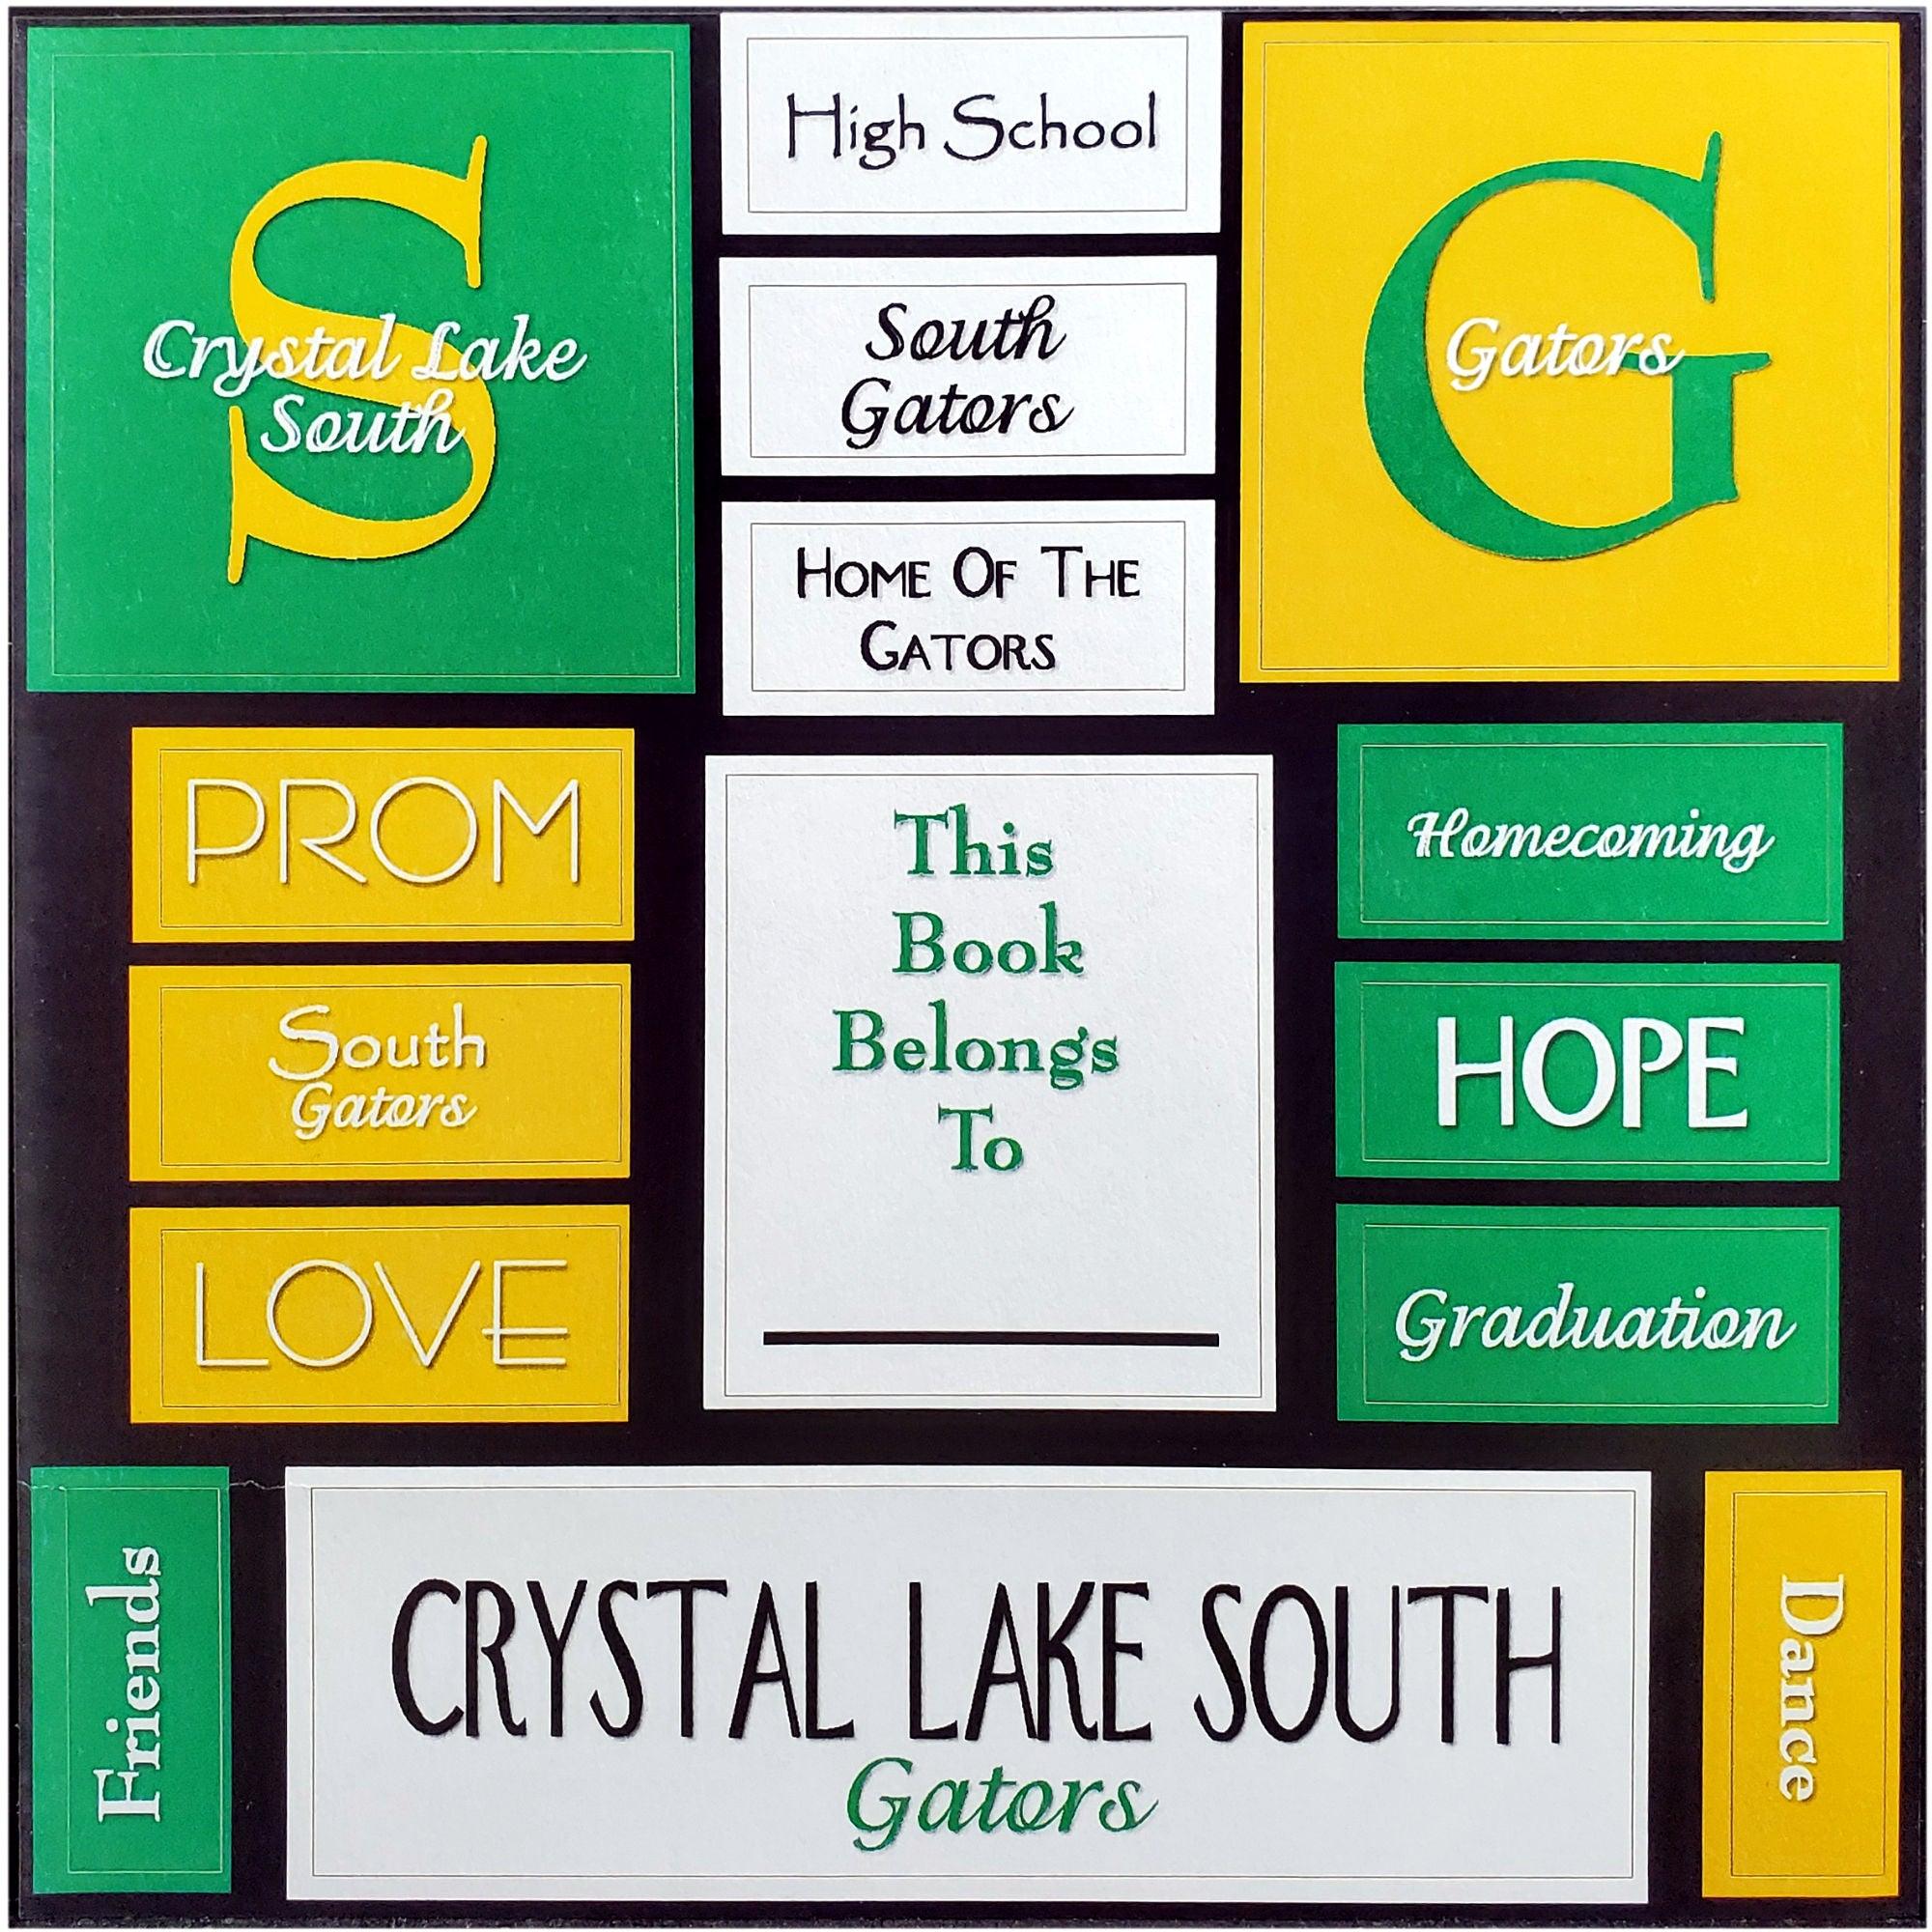 Crystal Lake South Gators, Crystal Lake, IL, Mini Album Kit includes album, sticker, and cardstock by Scrapbook Customs - Scrapbook Supply Companies